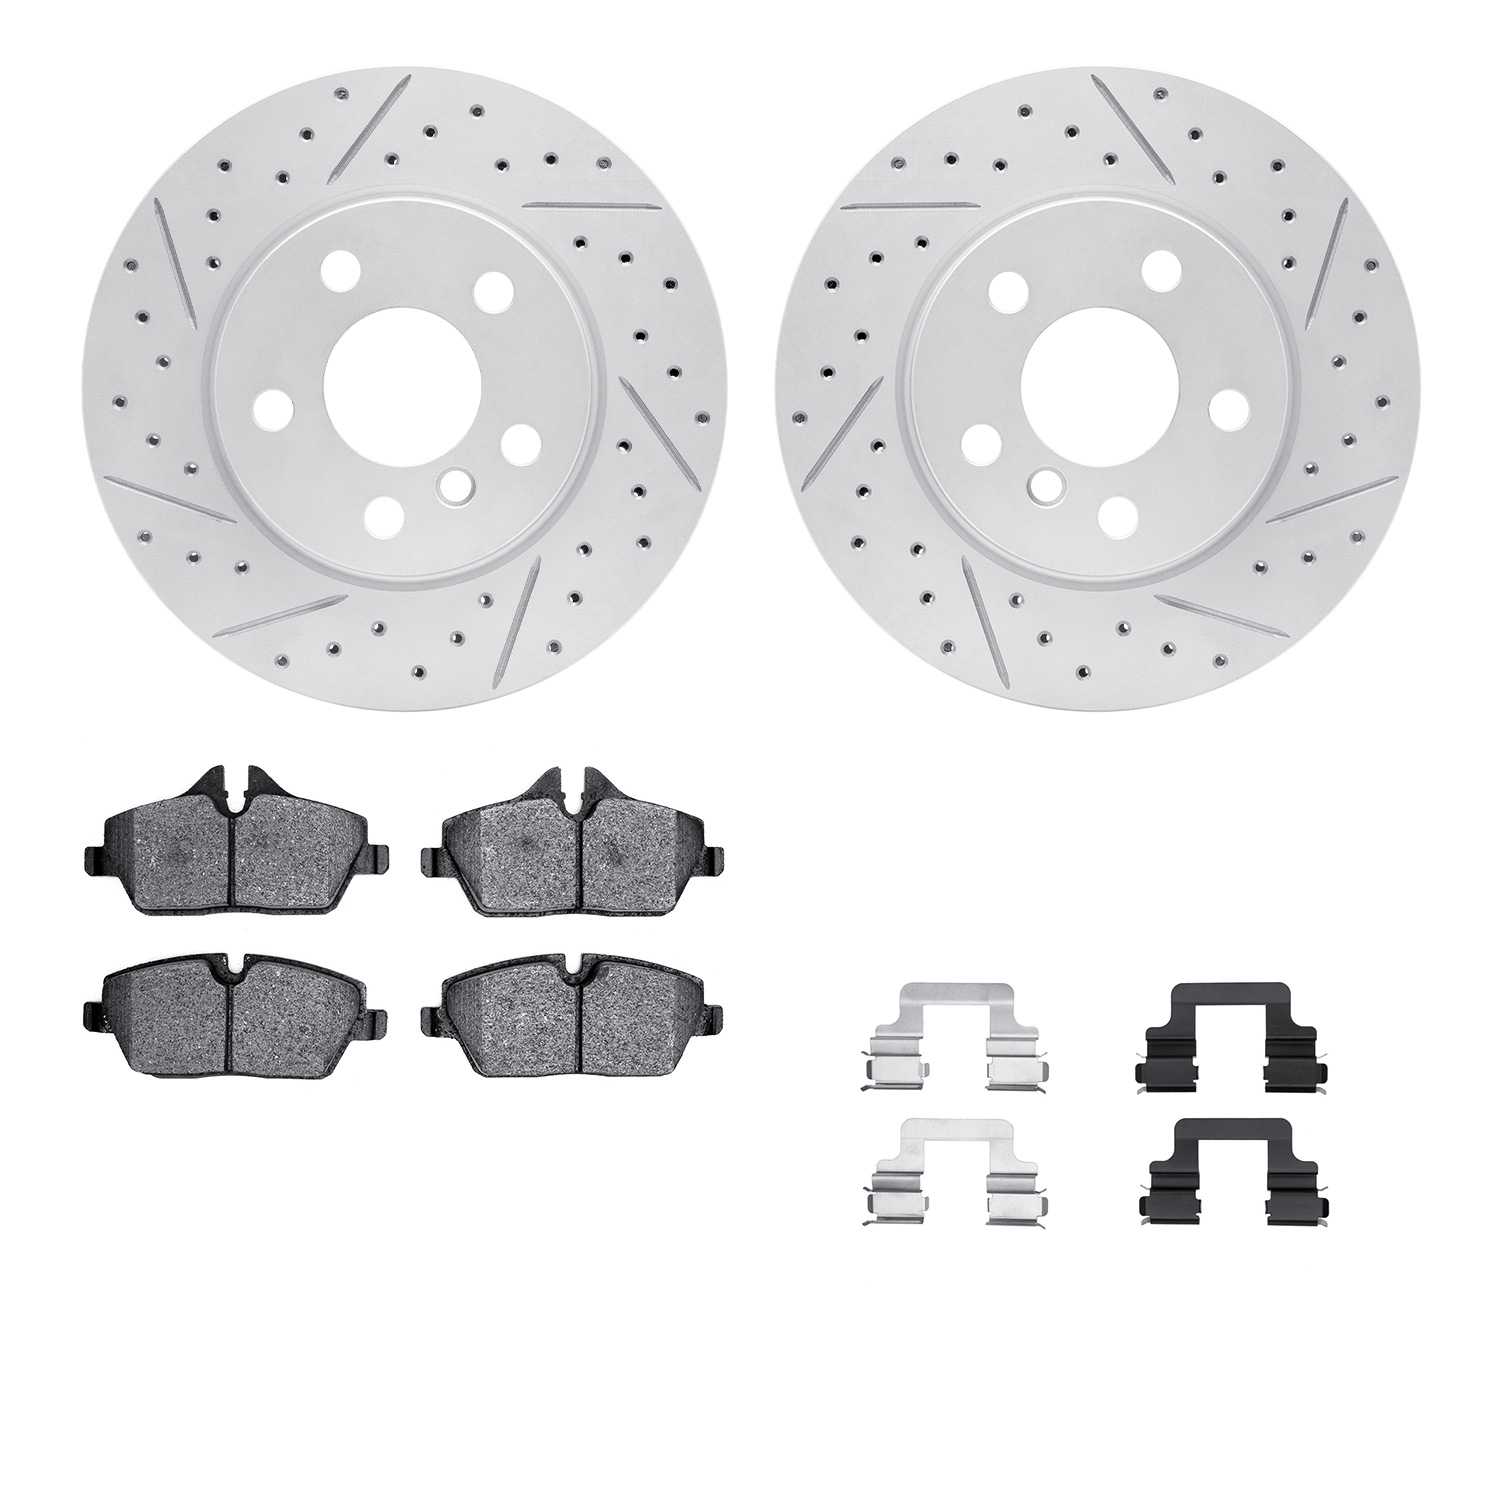 2512-32021 Geoperformance Drilled/Slotted Rotors w/5000 Advanced Brake Pads Kit & Hardware, Fits Select Mini, Position: Front